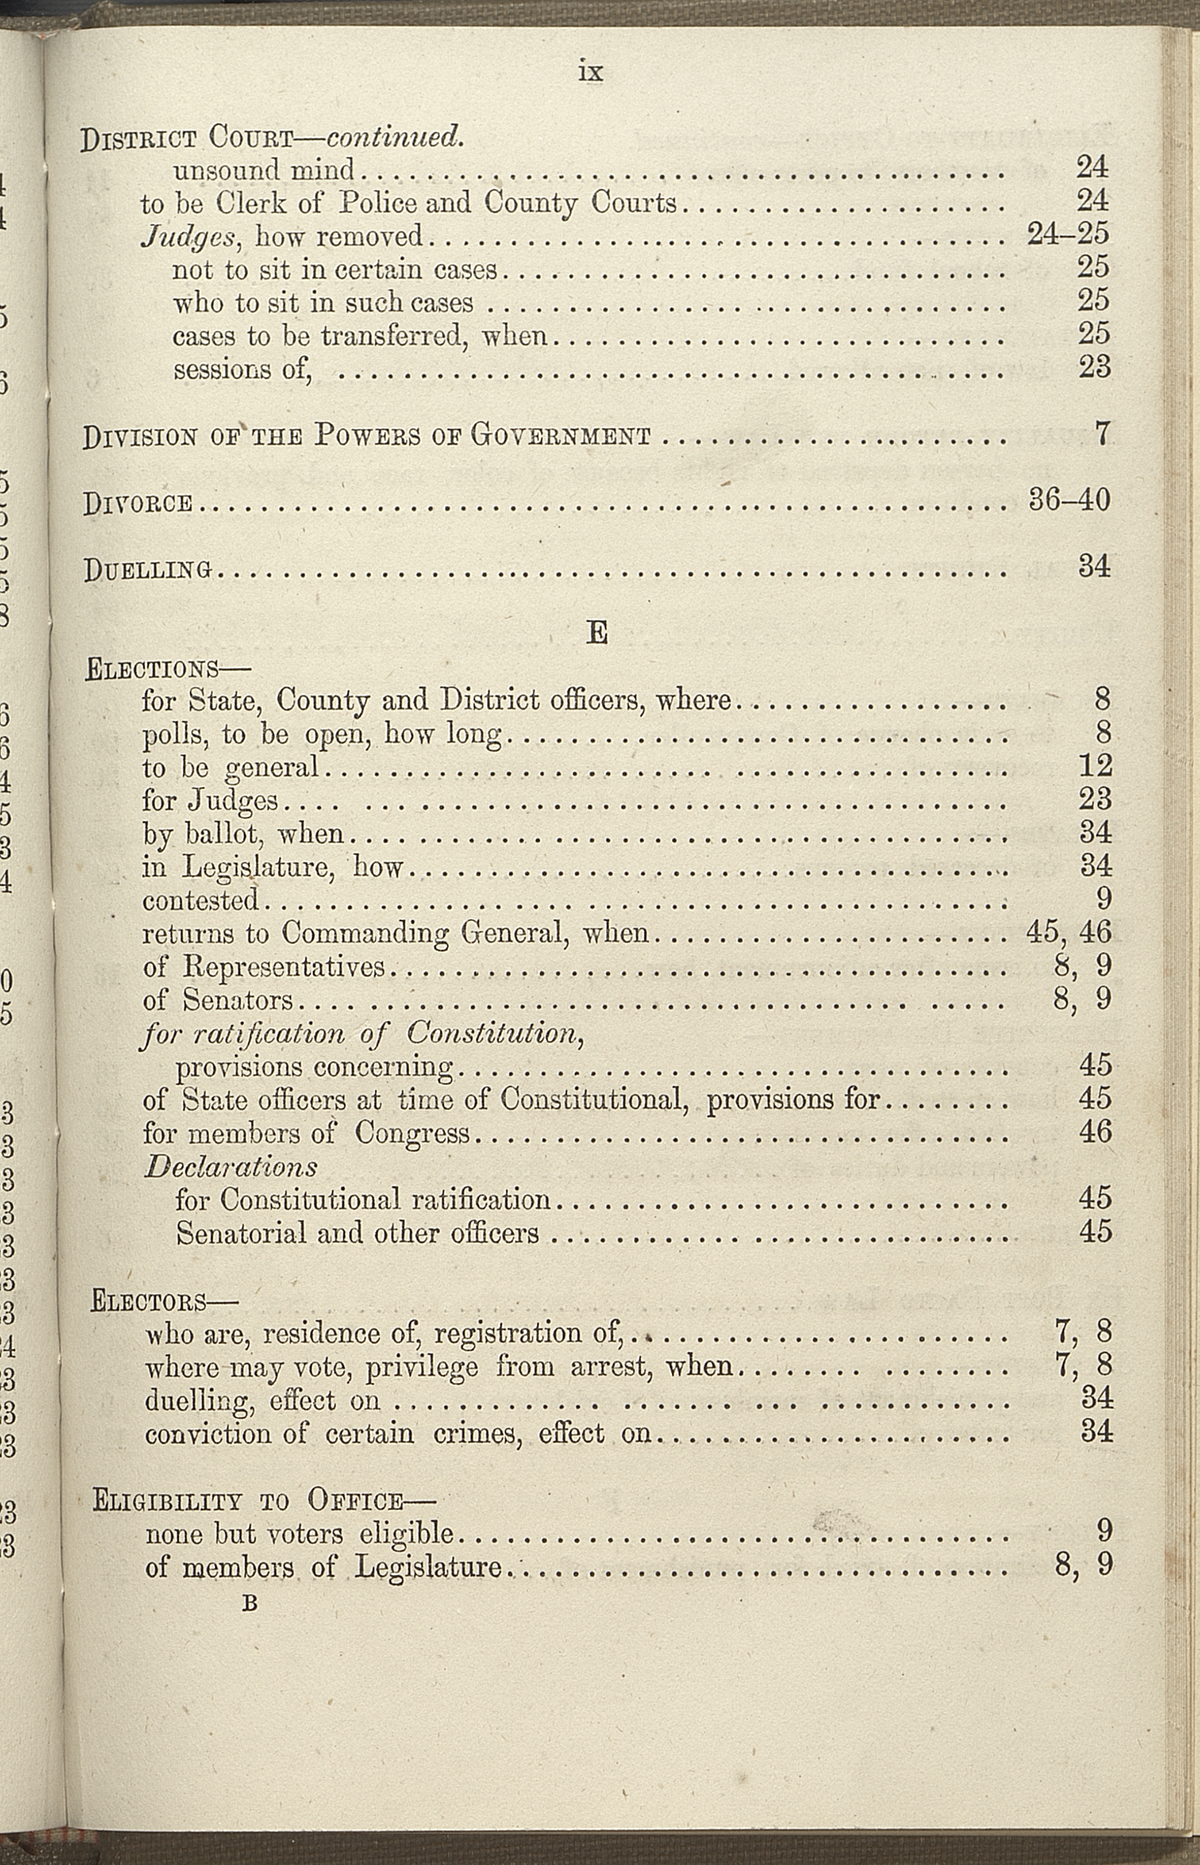 page 9 - 1869 index